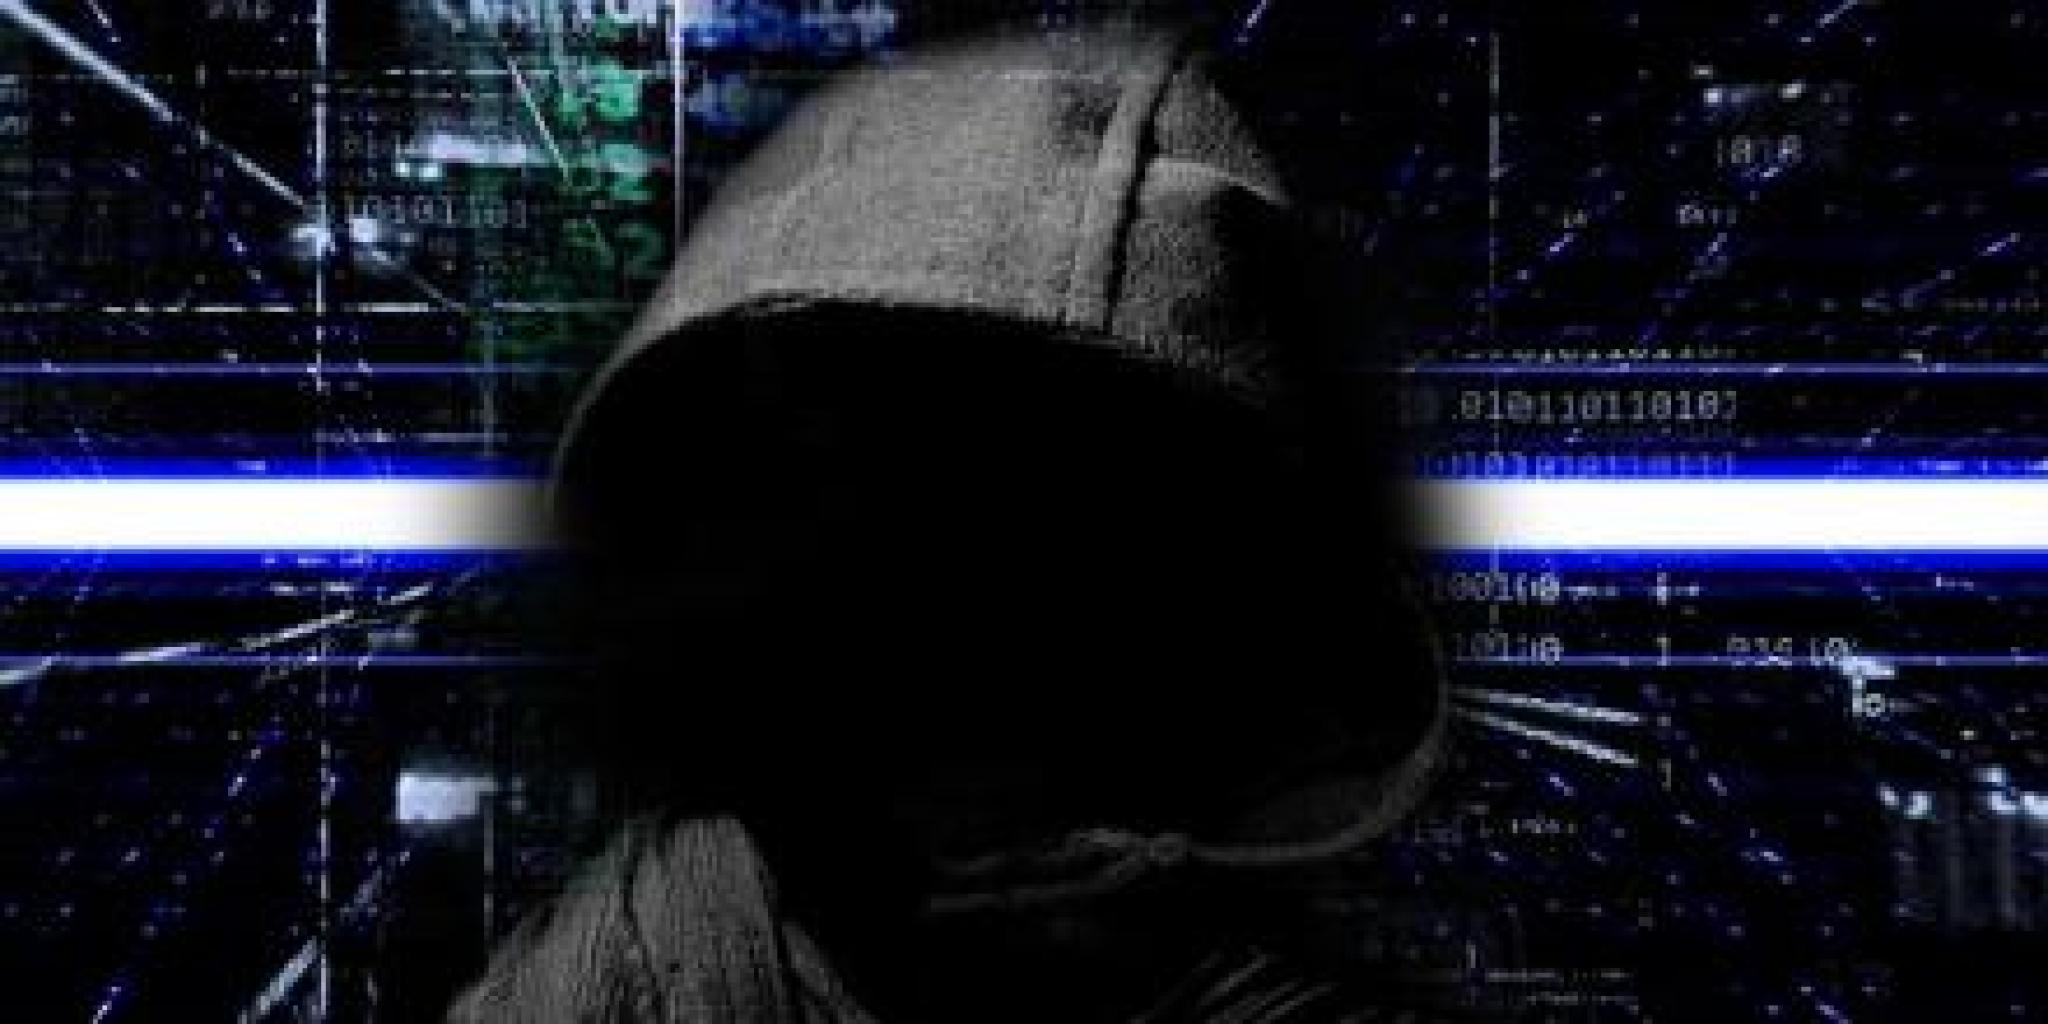 Image of sinister unidentifiable hacker by Pete Linforth from https://pixabay.com/illustrations/ransomware-cyber-crime-malware-2321110/ free to use under pixabay license https://pixabay.com/service/license/  